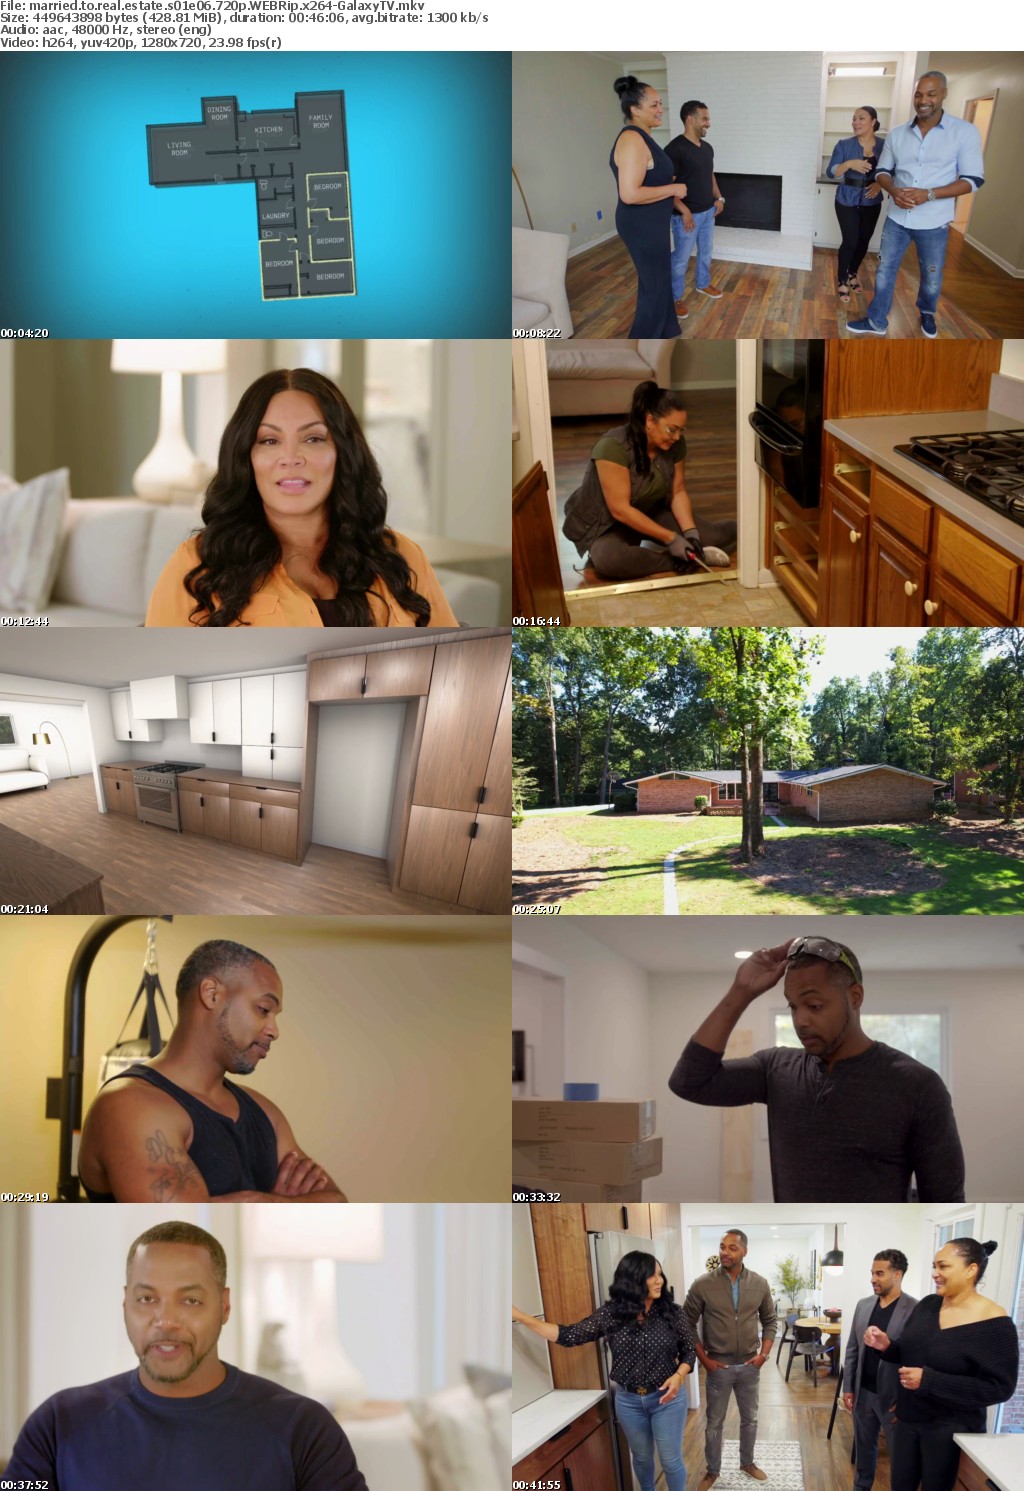 Married to Real Estate S01 COMPLETE 720p WEBRip x264-GalaxyTV